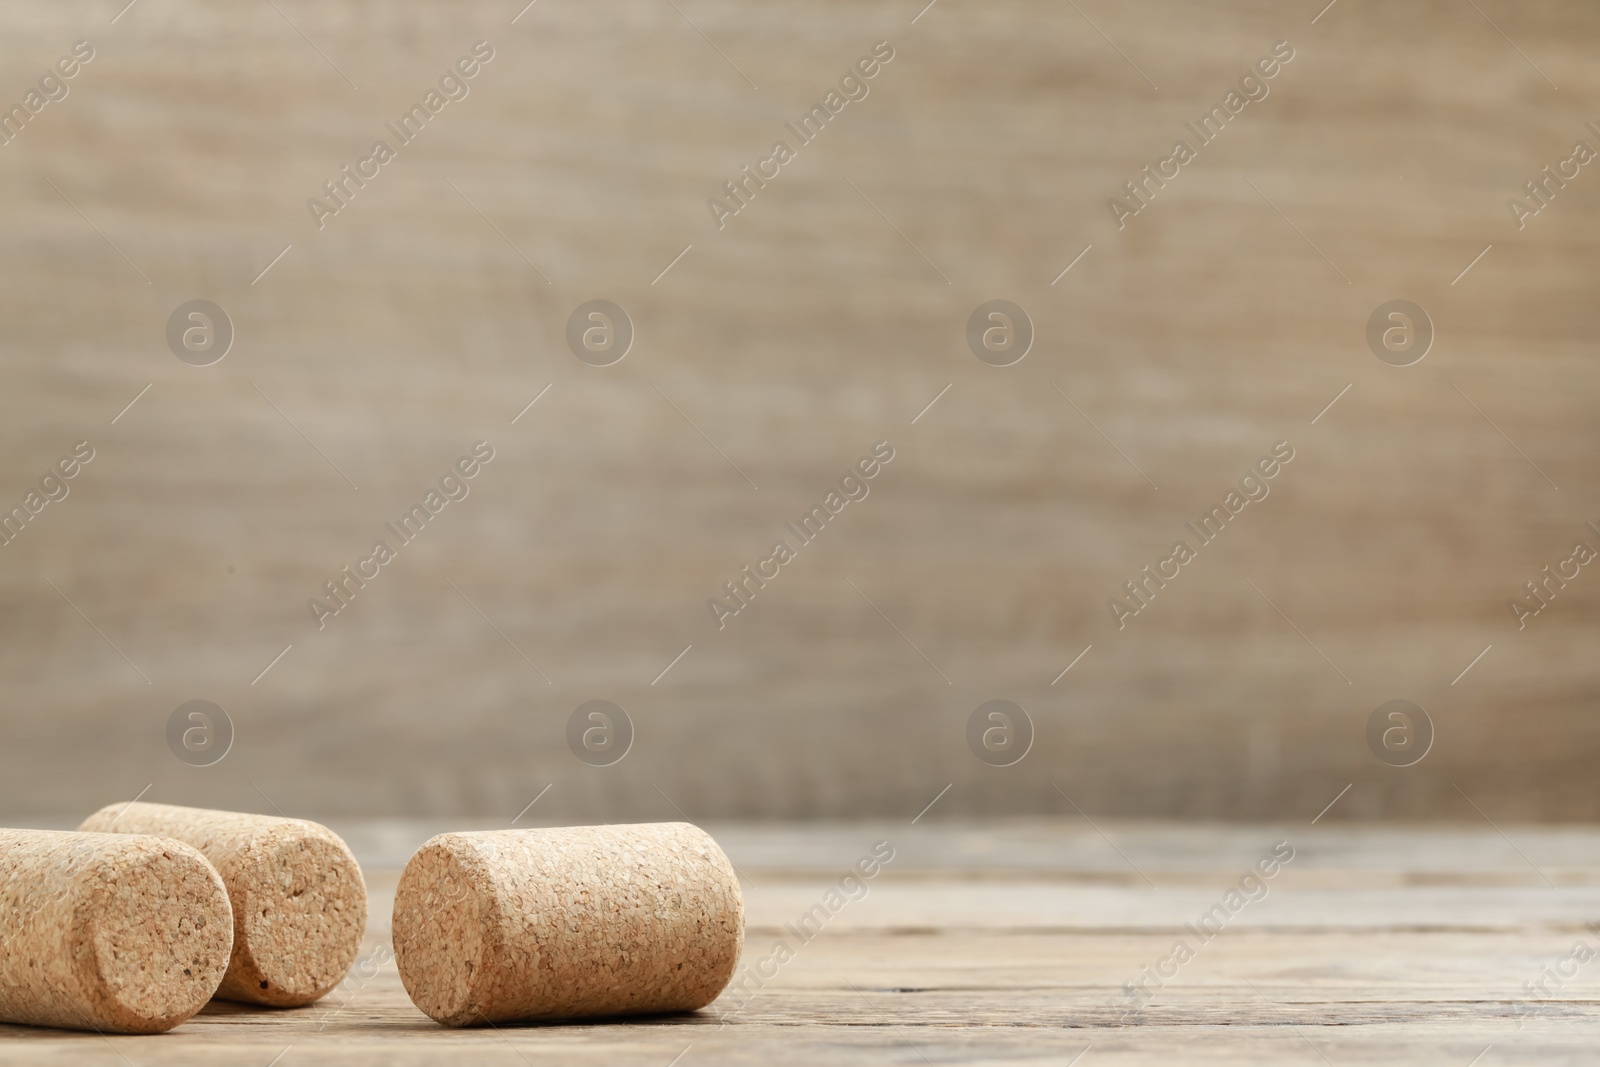 Photo of Corks of wine bottles on wooden table. Space for text